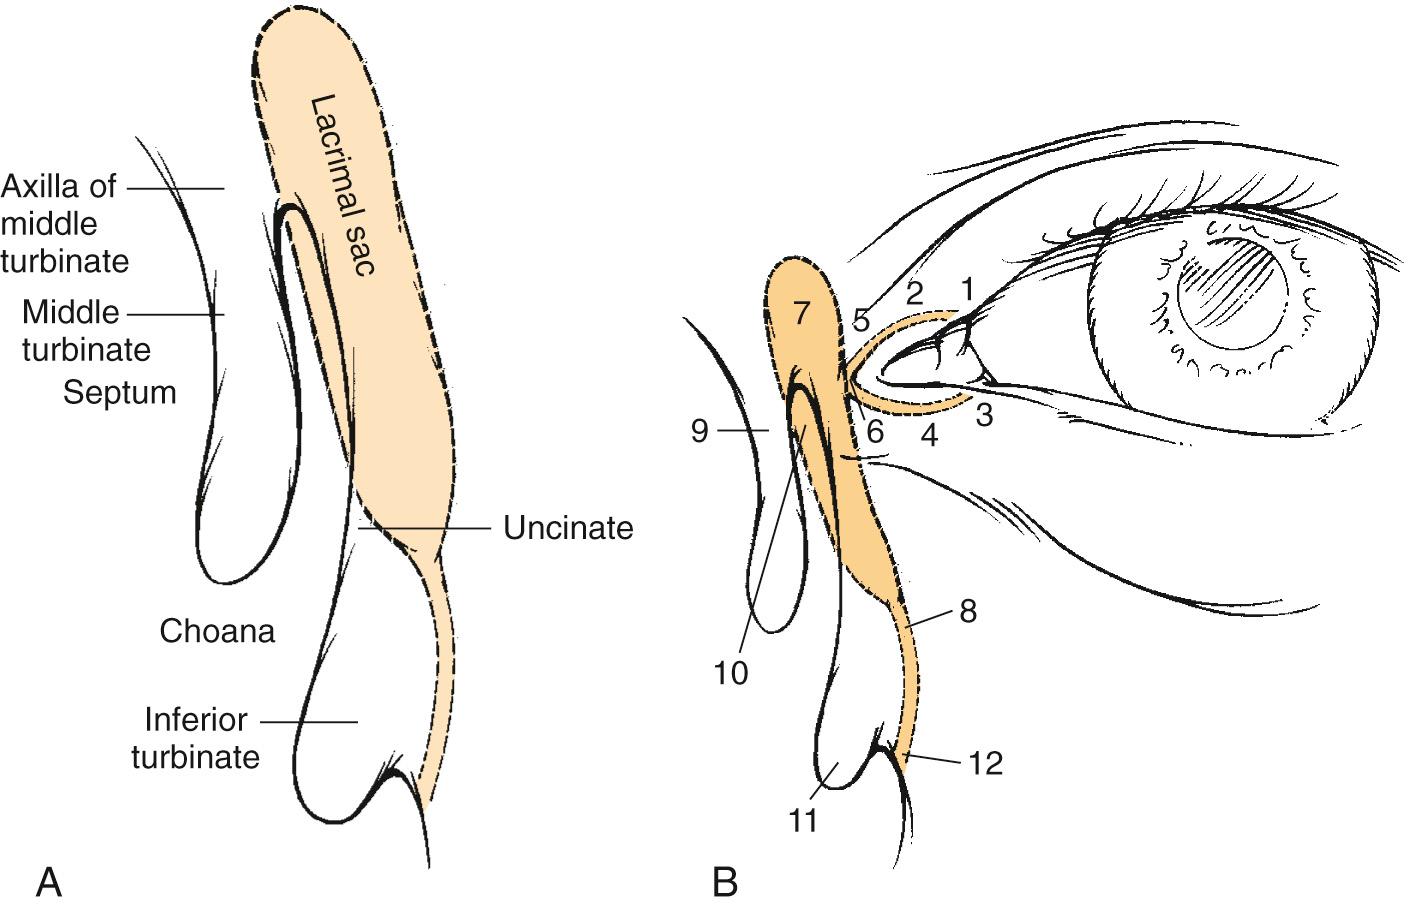 Fig. 49.1, (A) Position of lacrimal sac, as seen during endonasal visualization. The lacrimal sac and duct is located under the mucosa and the frontal process of the maxilla in a position outlined by the dotted line. (B) Anatomy of the left lacrimal apparatus. 1 , Superior punctum; 2 , superior canaliculus; 3 , inferior punctum; 4 , inferior canaliculus; 5 , medial canthal ligament; 6 , common canaliculus; 7 , lacrimal sac; 8 , lacrimal duct; 9 , middle turbinate; 10 , lacrimal bone; 11 , inferior turbinate; 12 , Hasner valve.